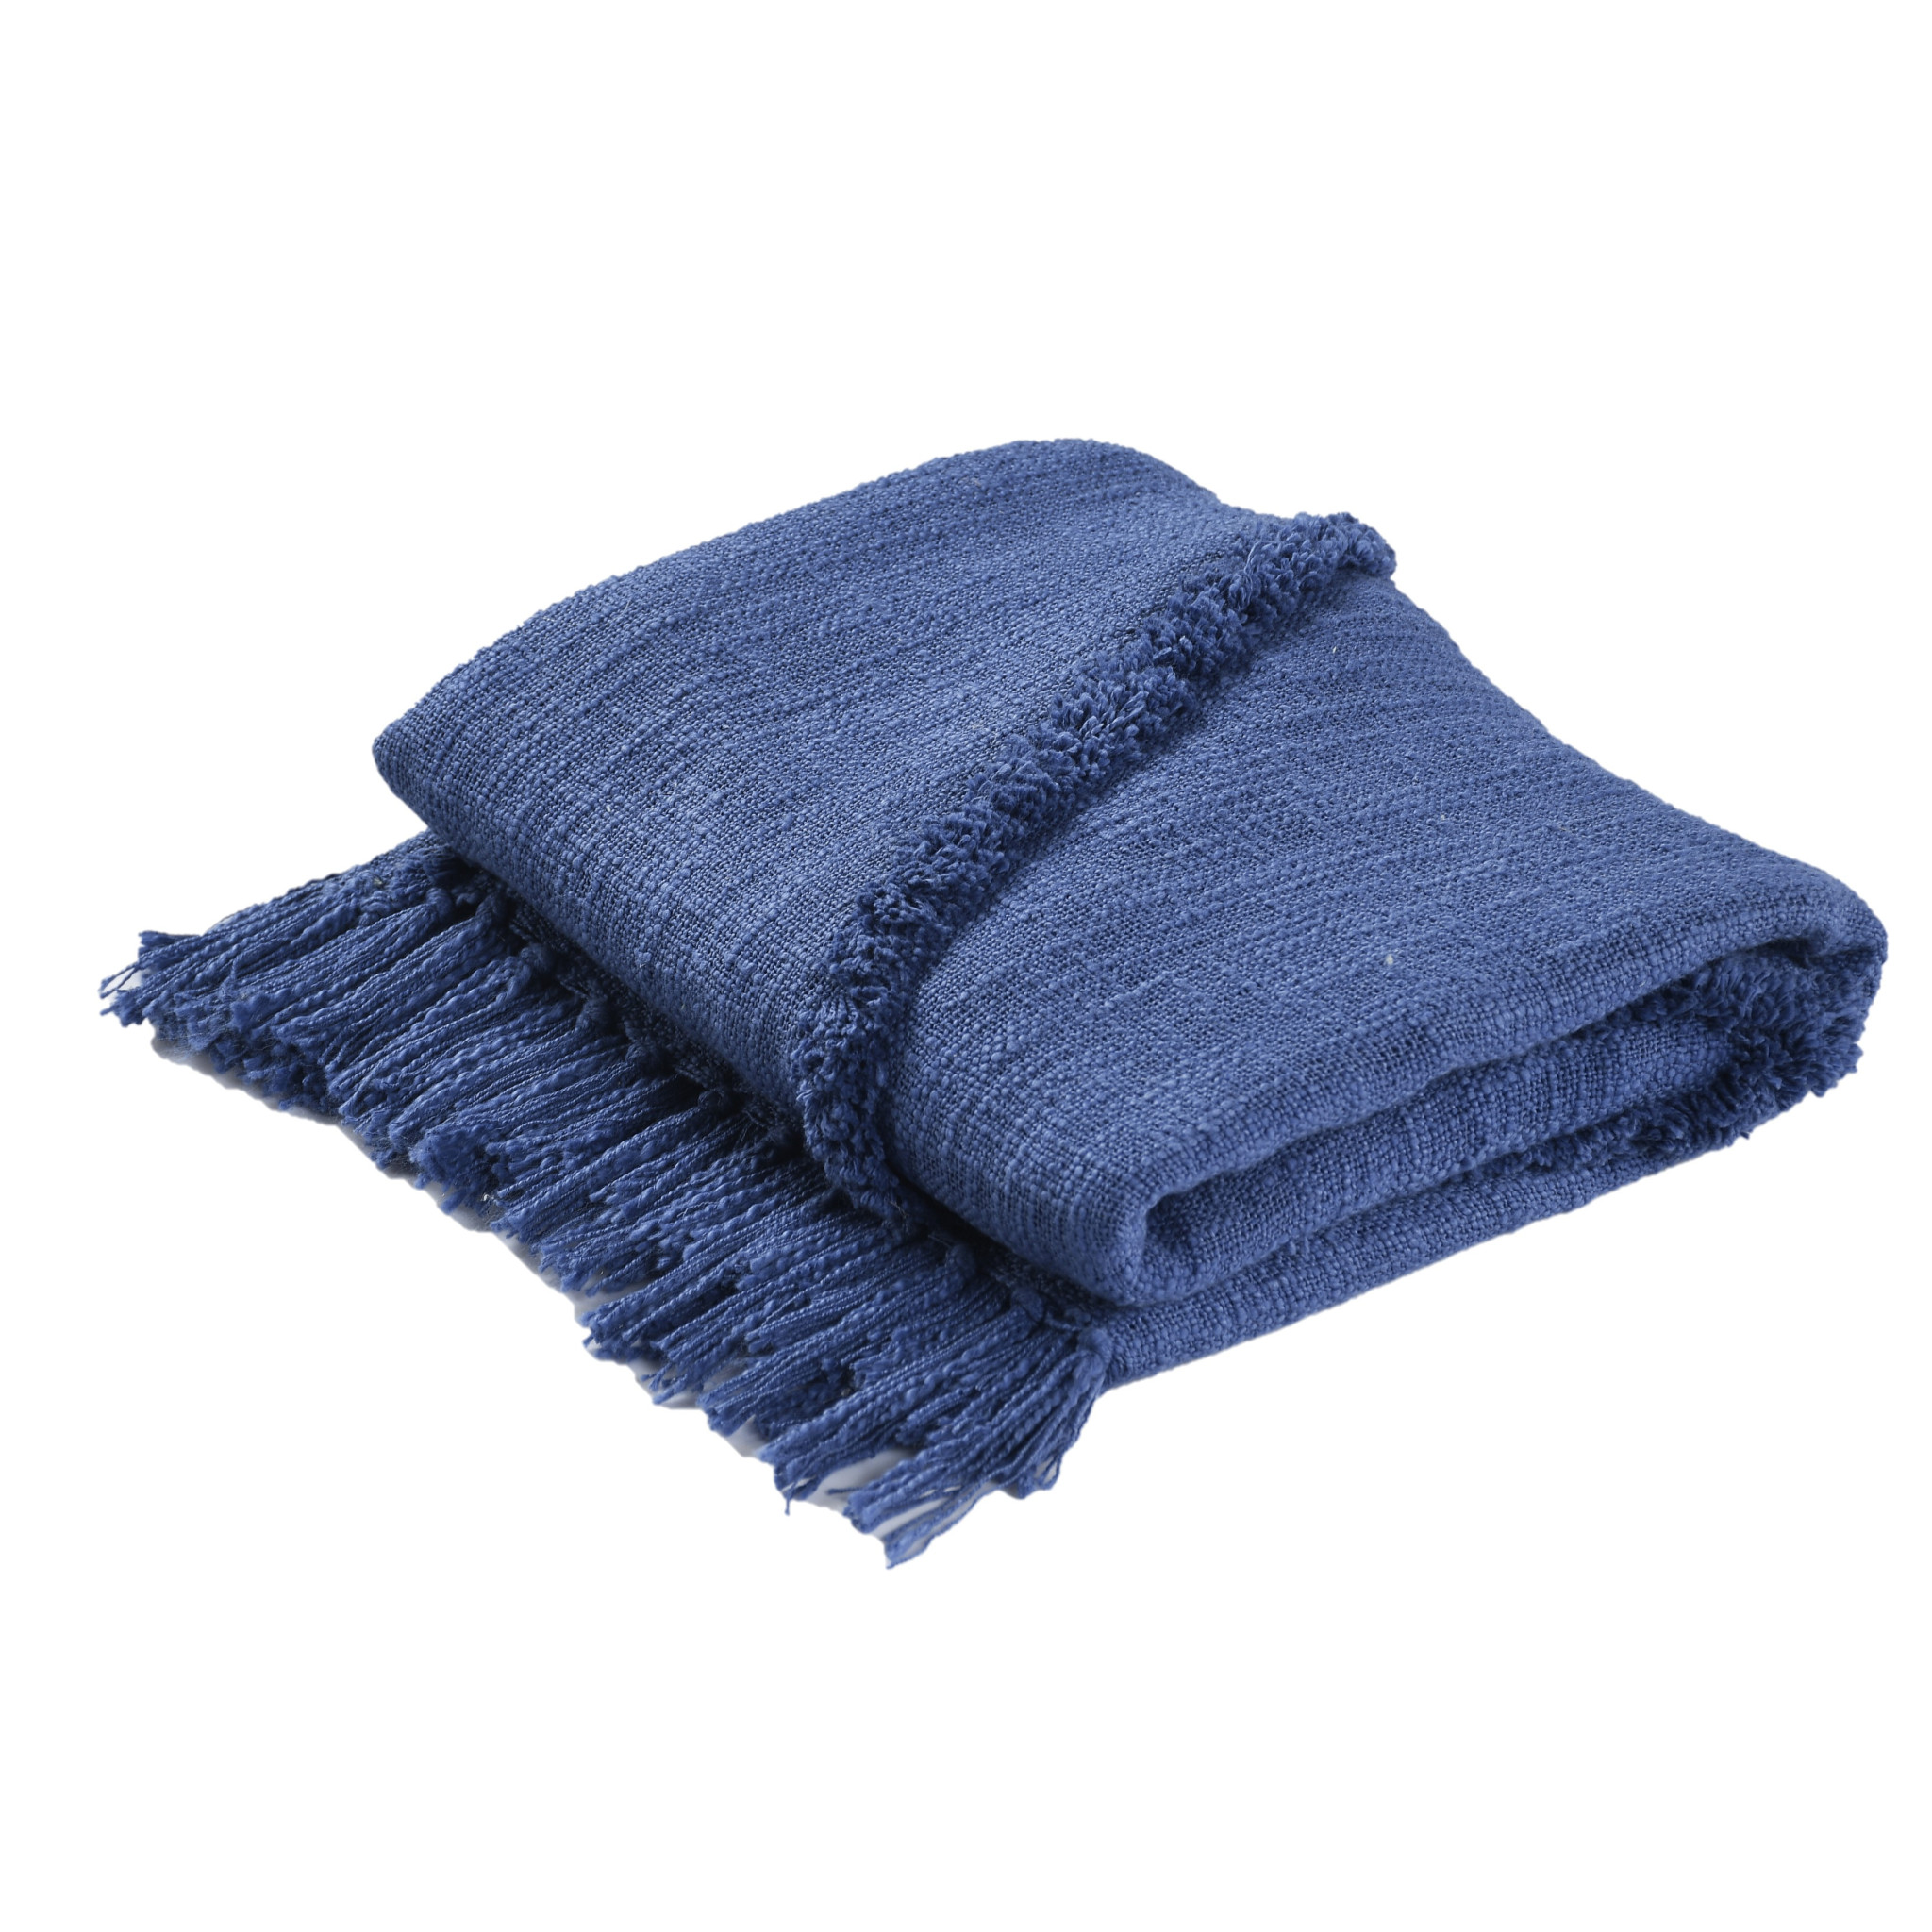 Blue Woven Cotton Solid Color Throw Blanket-516549-1